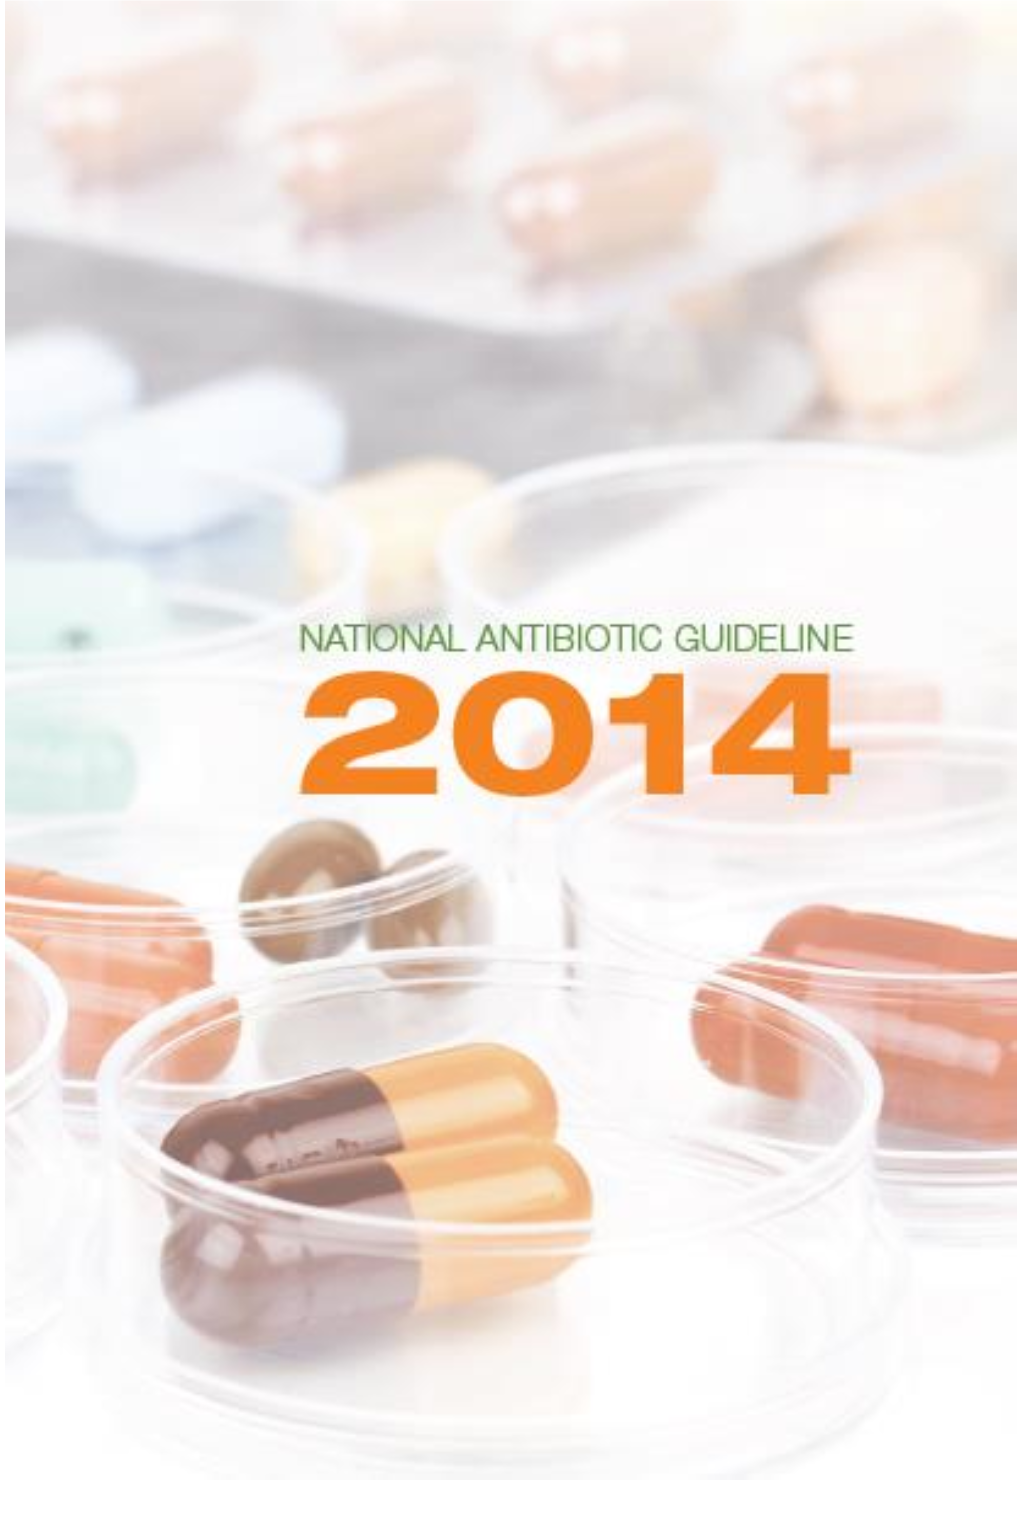 National Antibiotic Guideline 2014 Is in Line with the Protocol on Antimicrobial Stewardship (AMS) Program in Healthcare Facilities, Which Was Launched in 2014